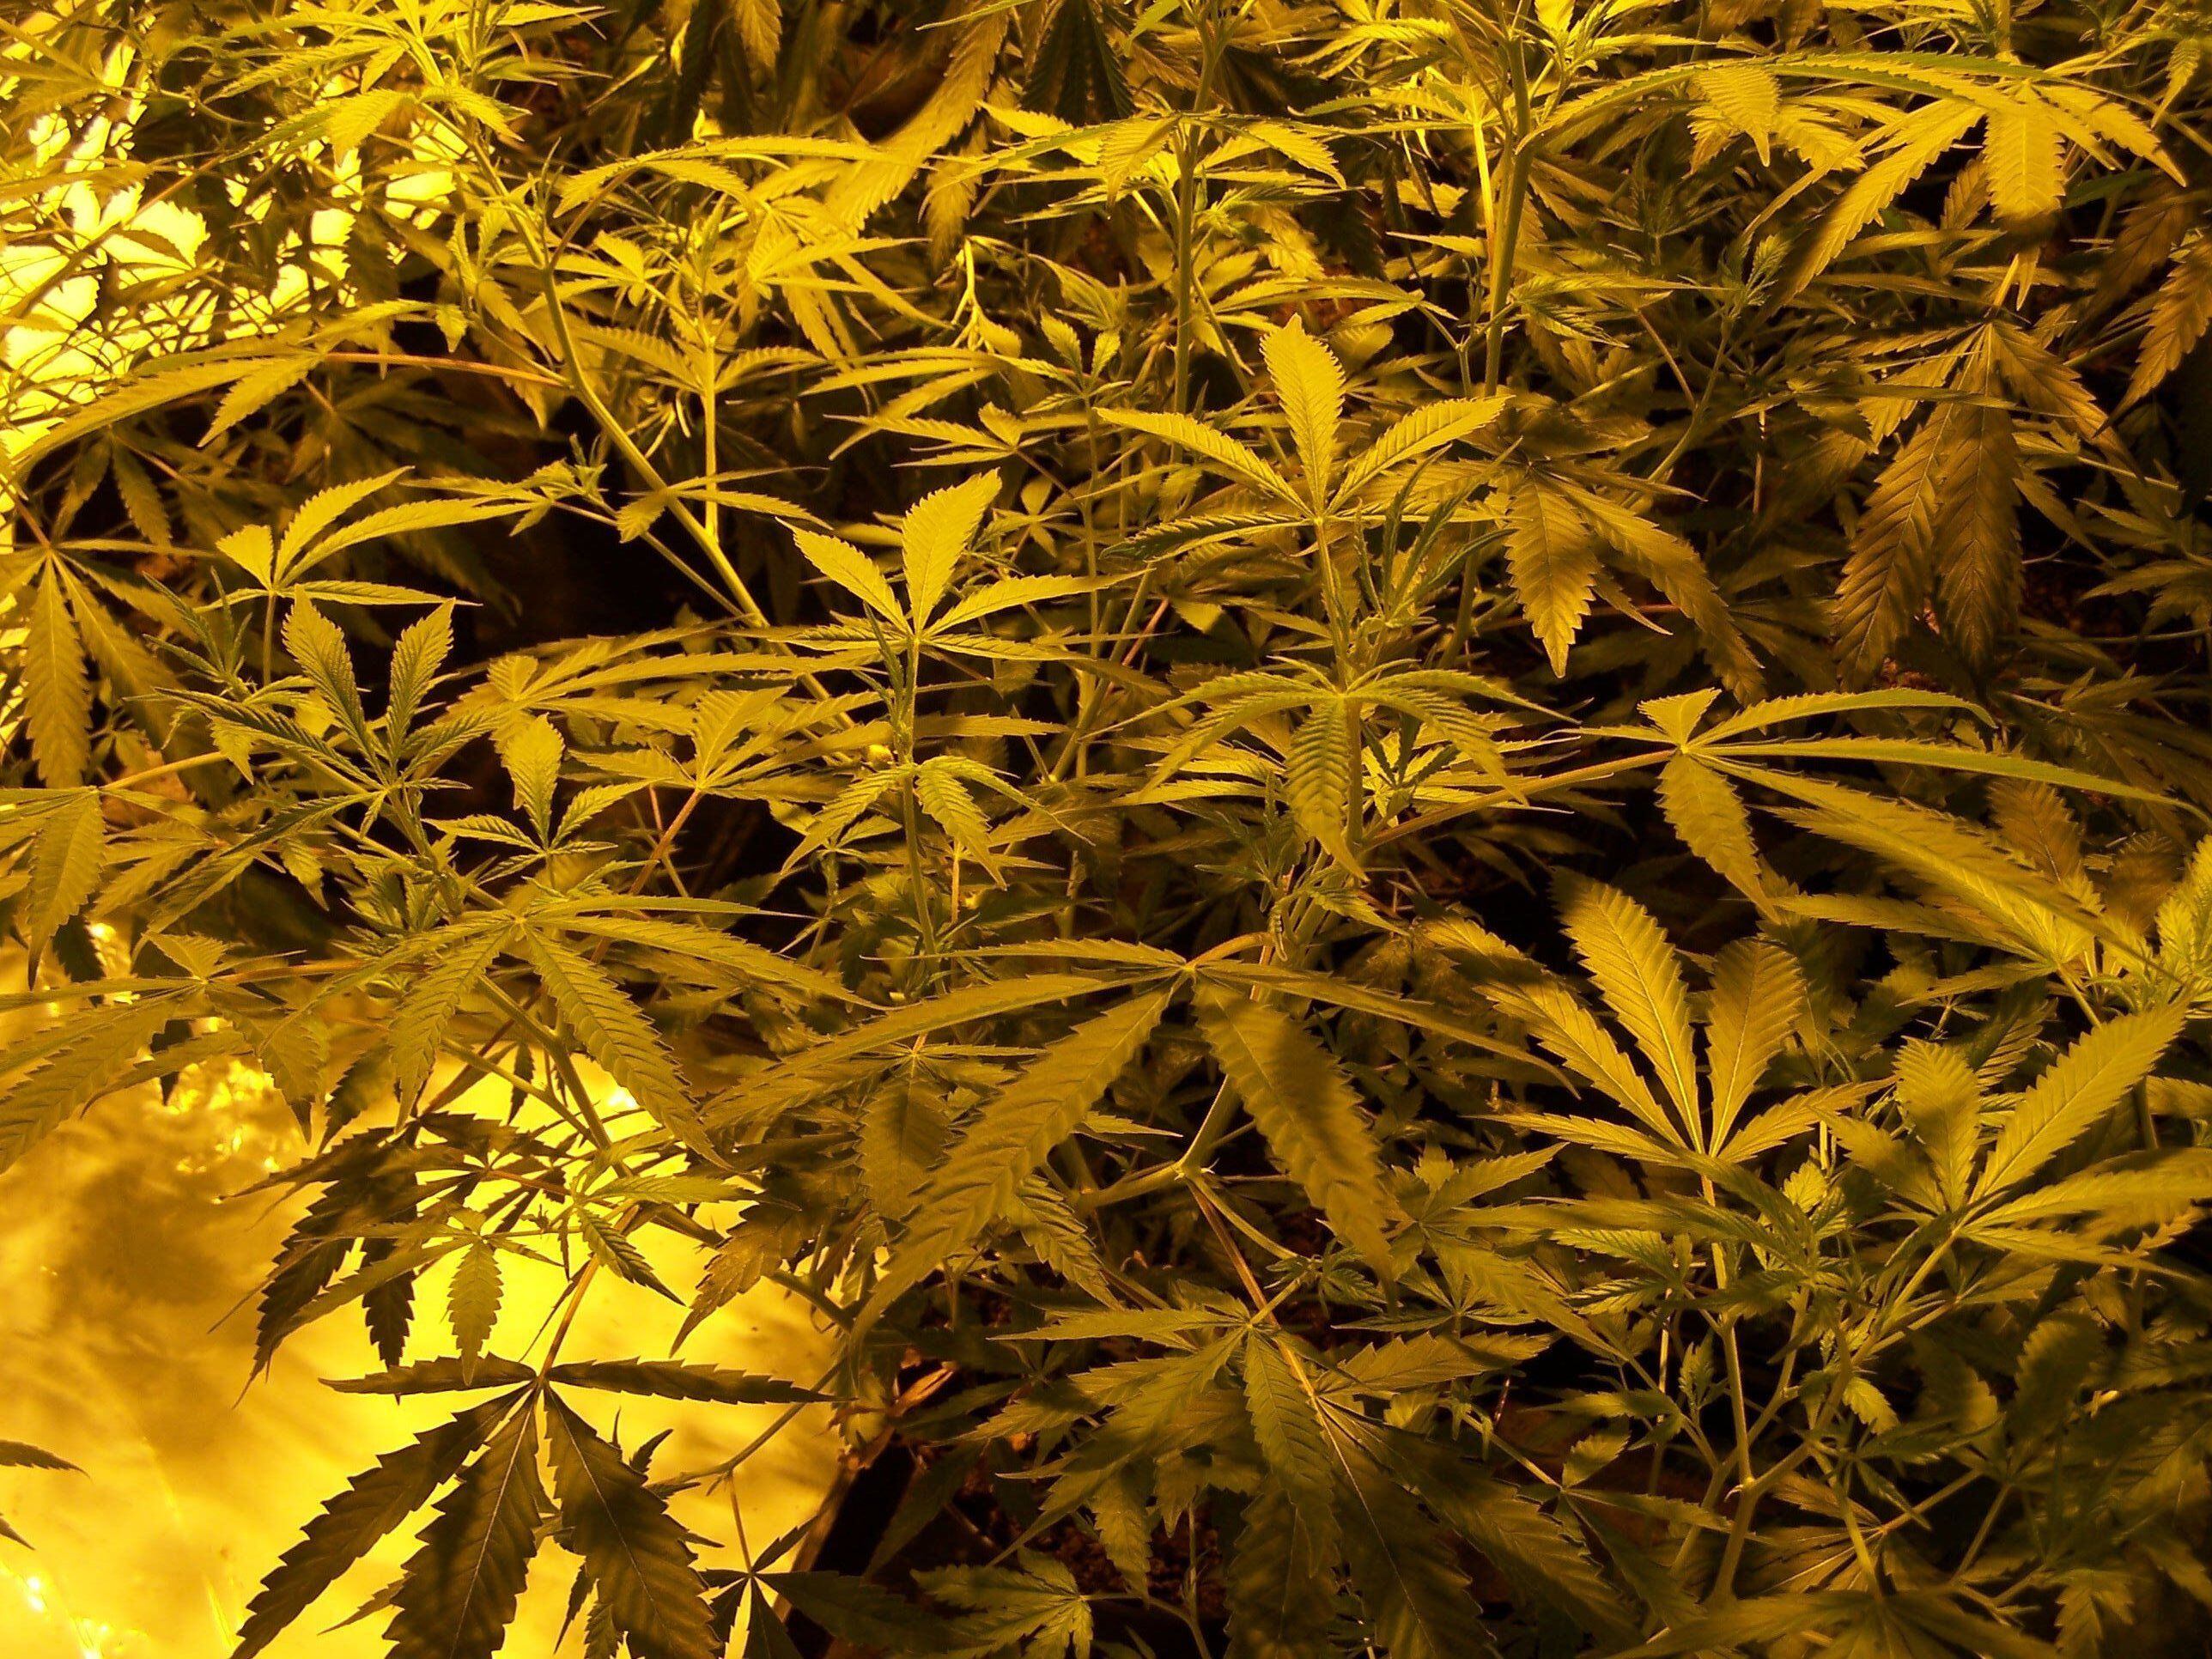 Man arrested after more than 500 cannabis plants found in South Staffordshire home